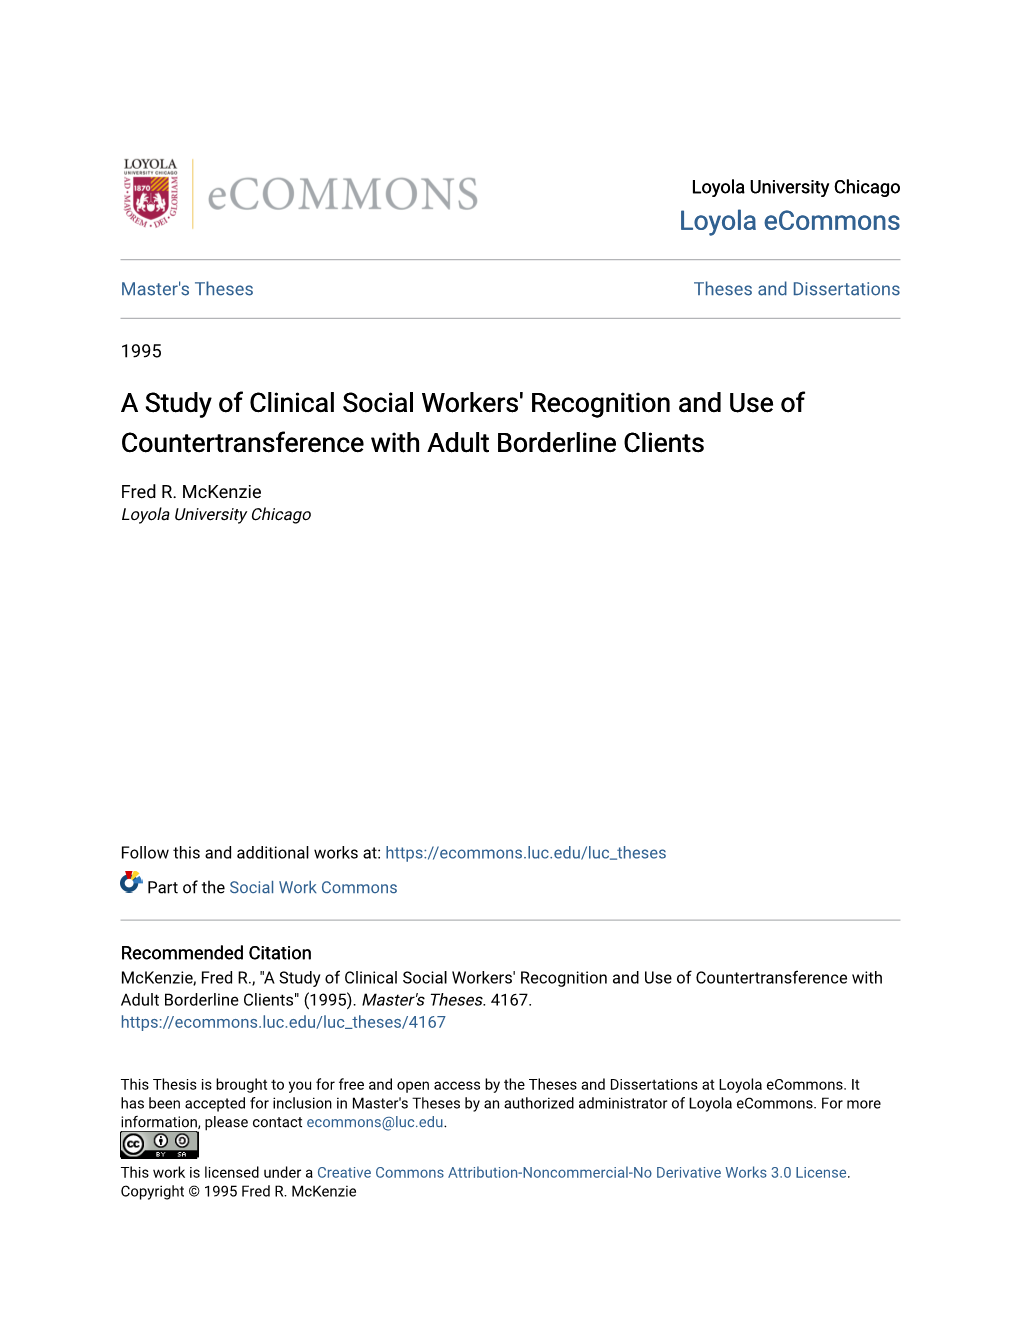 A Study of Clinical Social Workers' Recognition and Use of Countertransference with Adult Borderline Clients